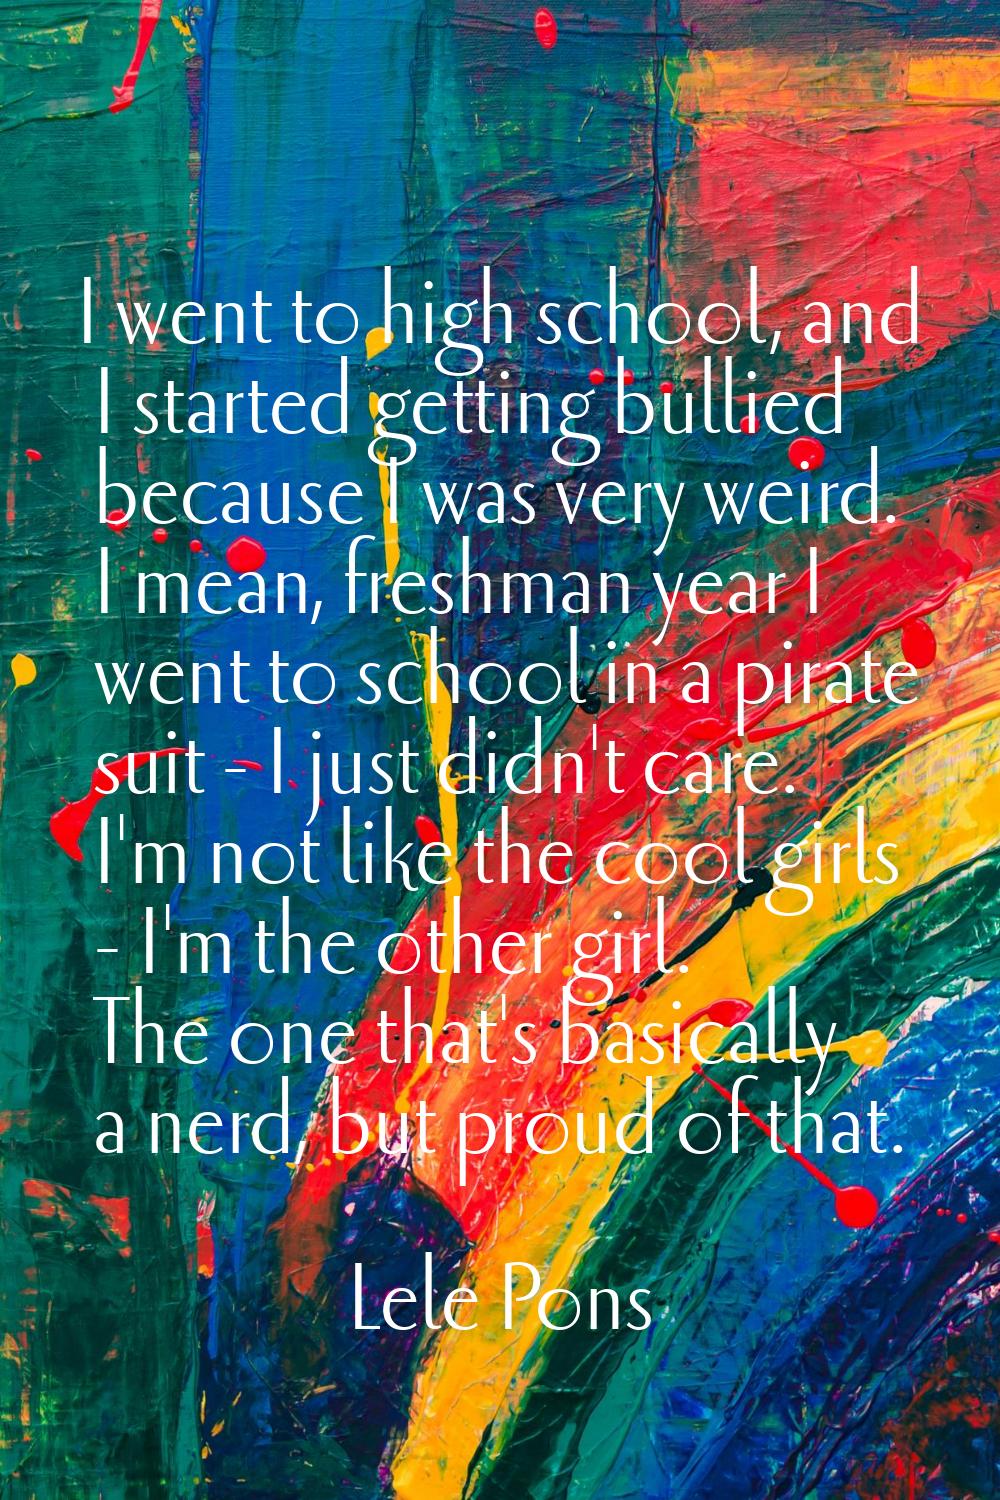 I went to high school, and I started getting bullied because I was very weird. I mean, freshman yea